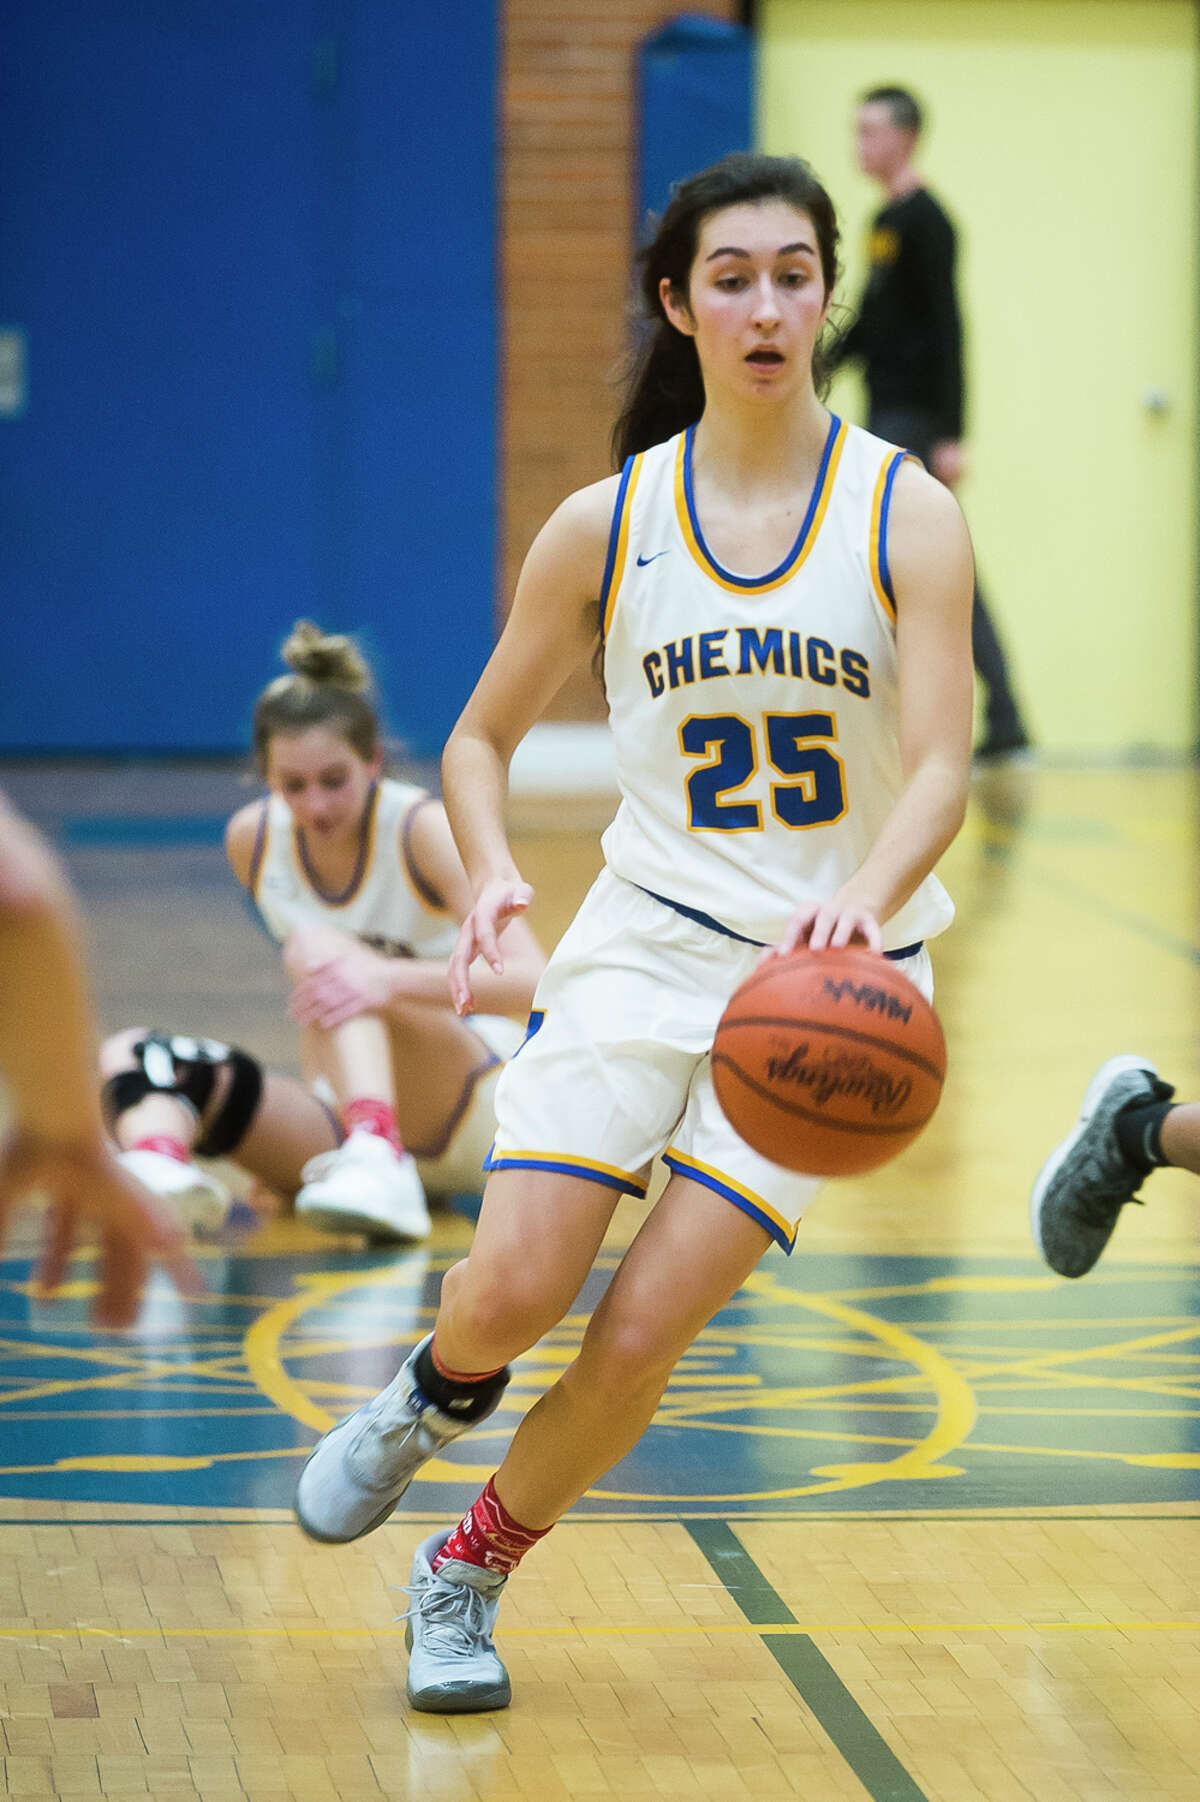 Midland's Sydnie Schafer dribbles down the court during the Chemics' game against Dow Thursday, Dec. 19, 2019 at Midland High School. (Katy Kildee/kkildee@mdn.net)